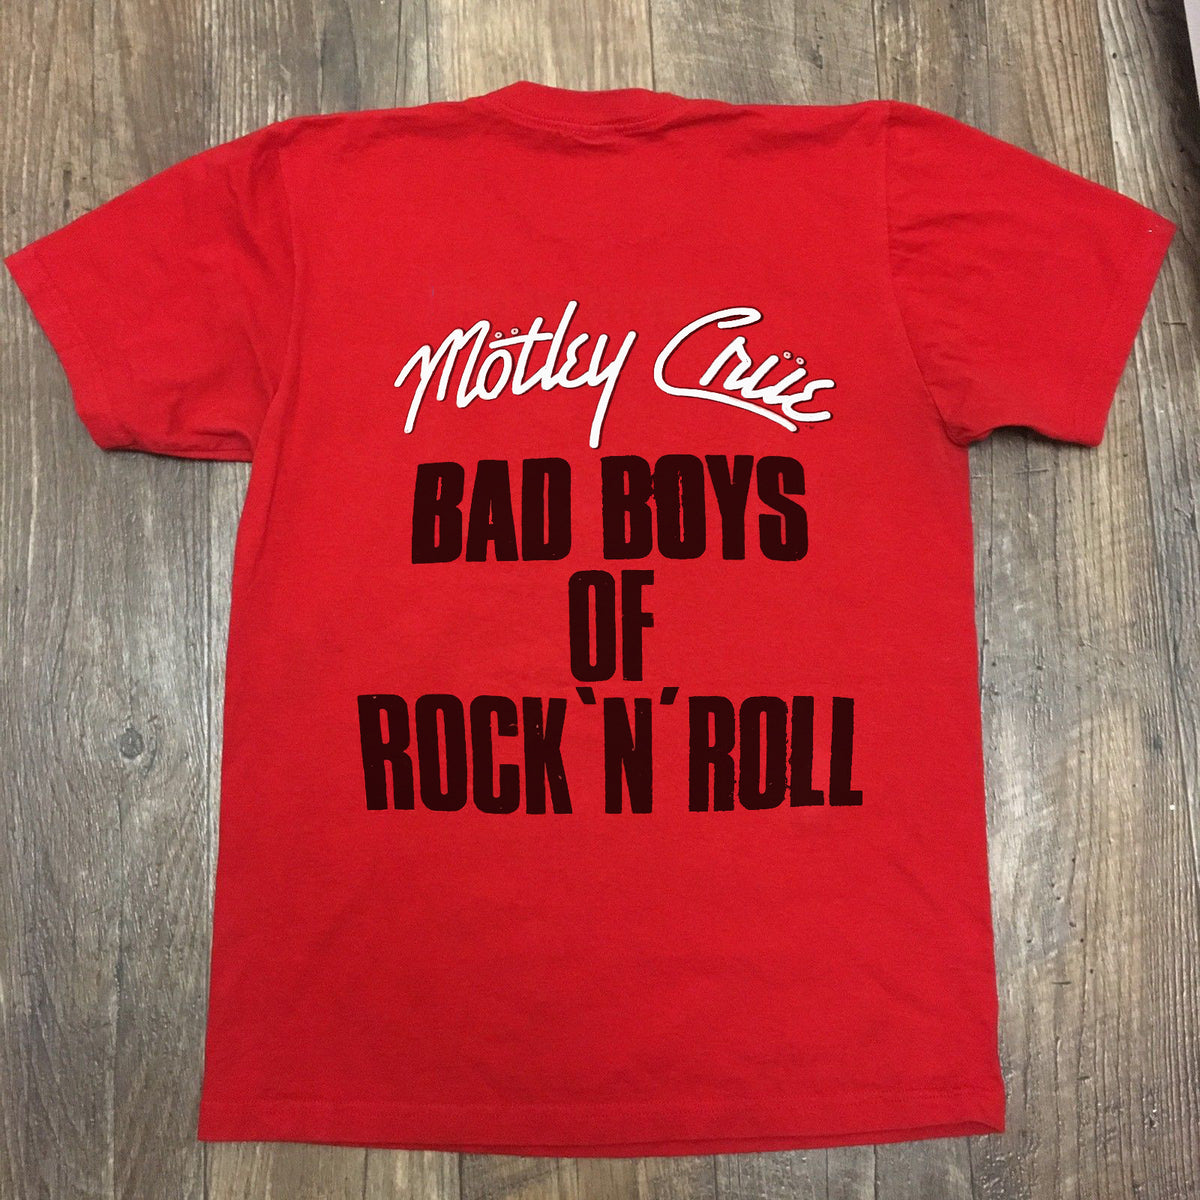 RARE Red MOTLEY CRUE Bad boys of rock and roll T-shirt